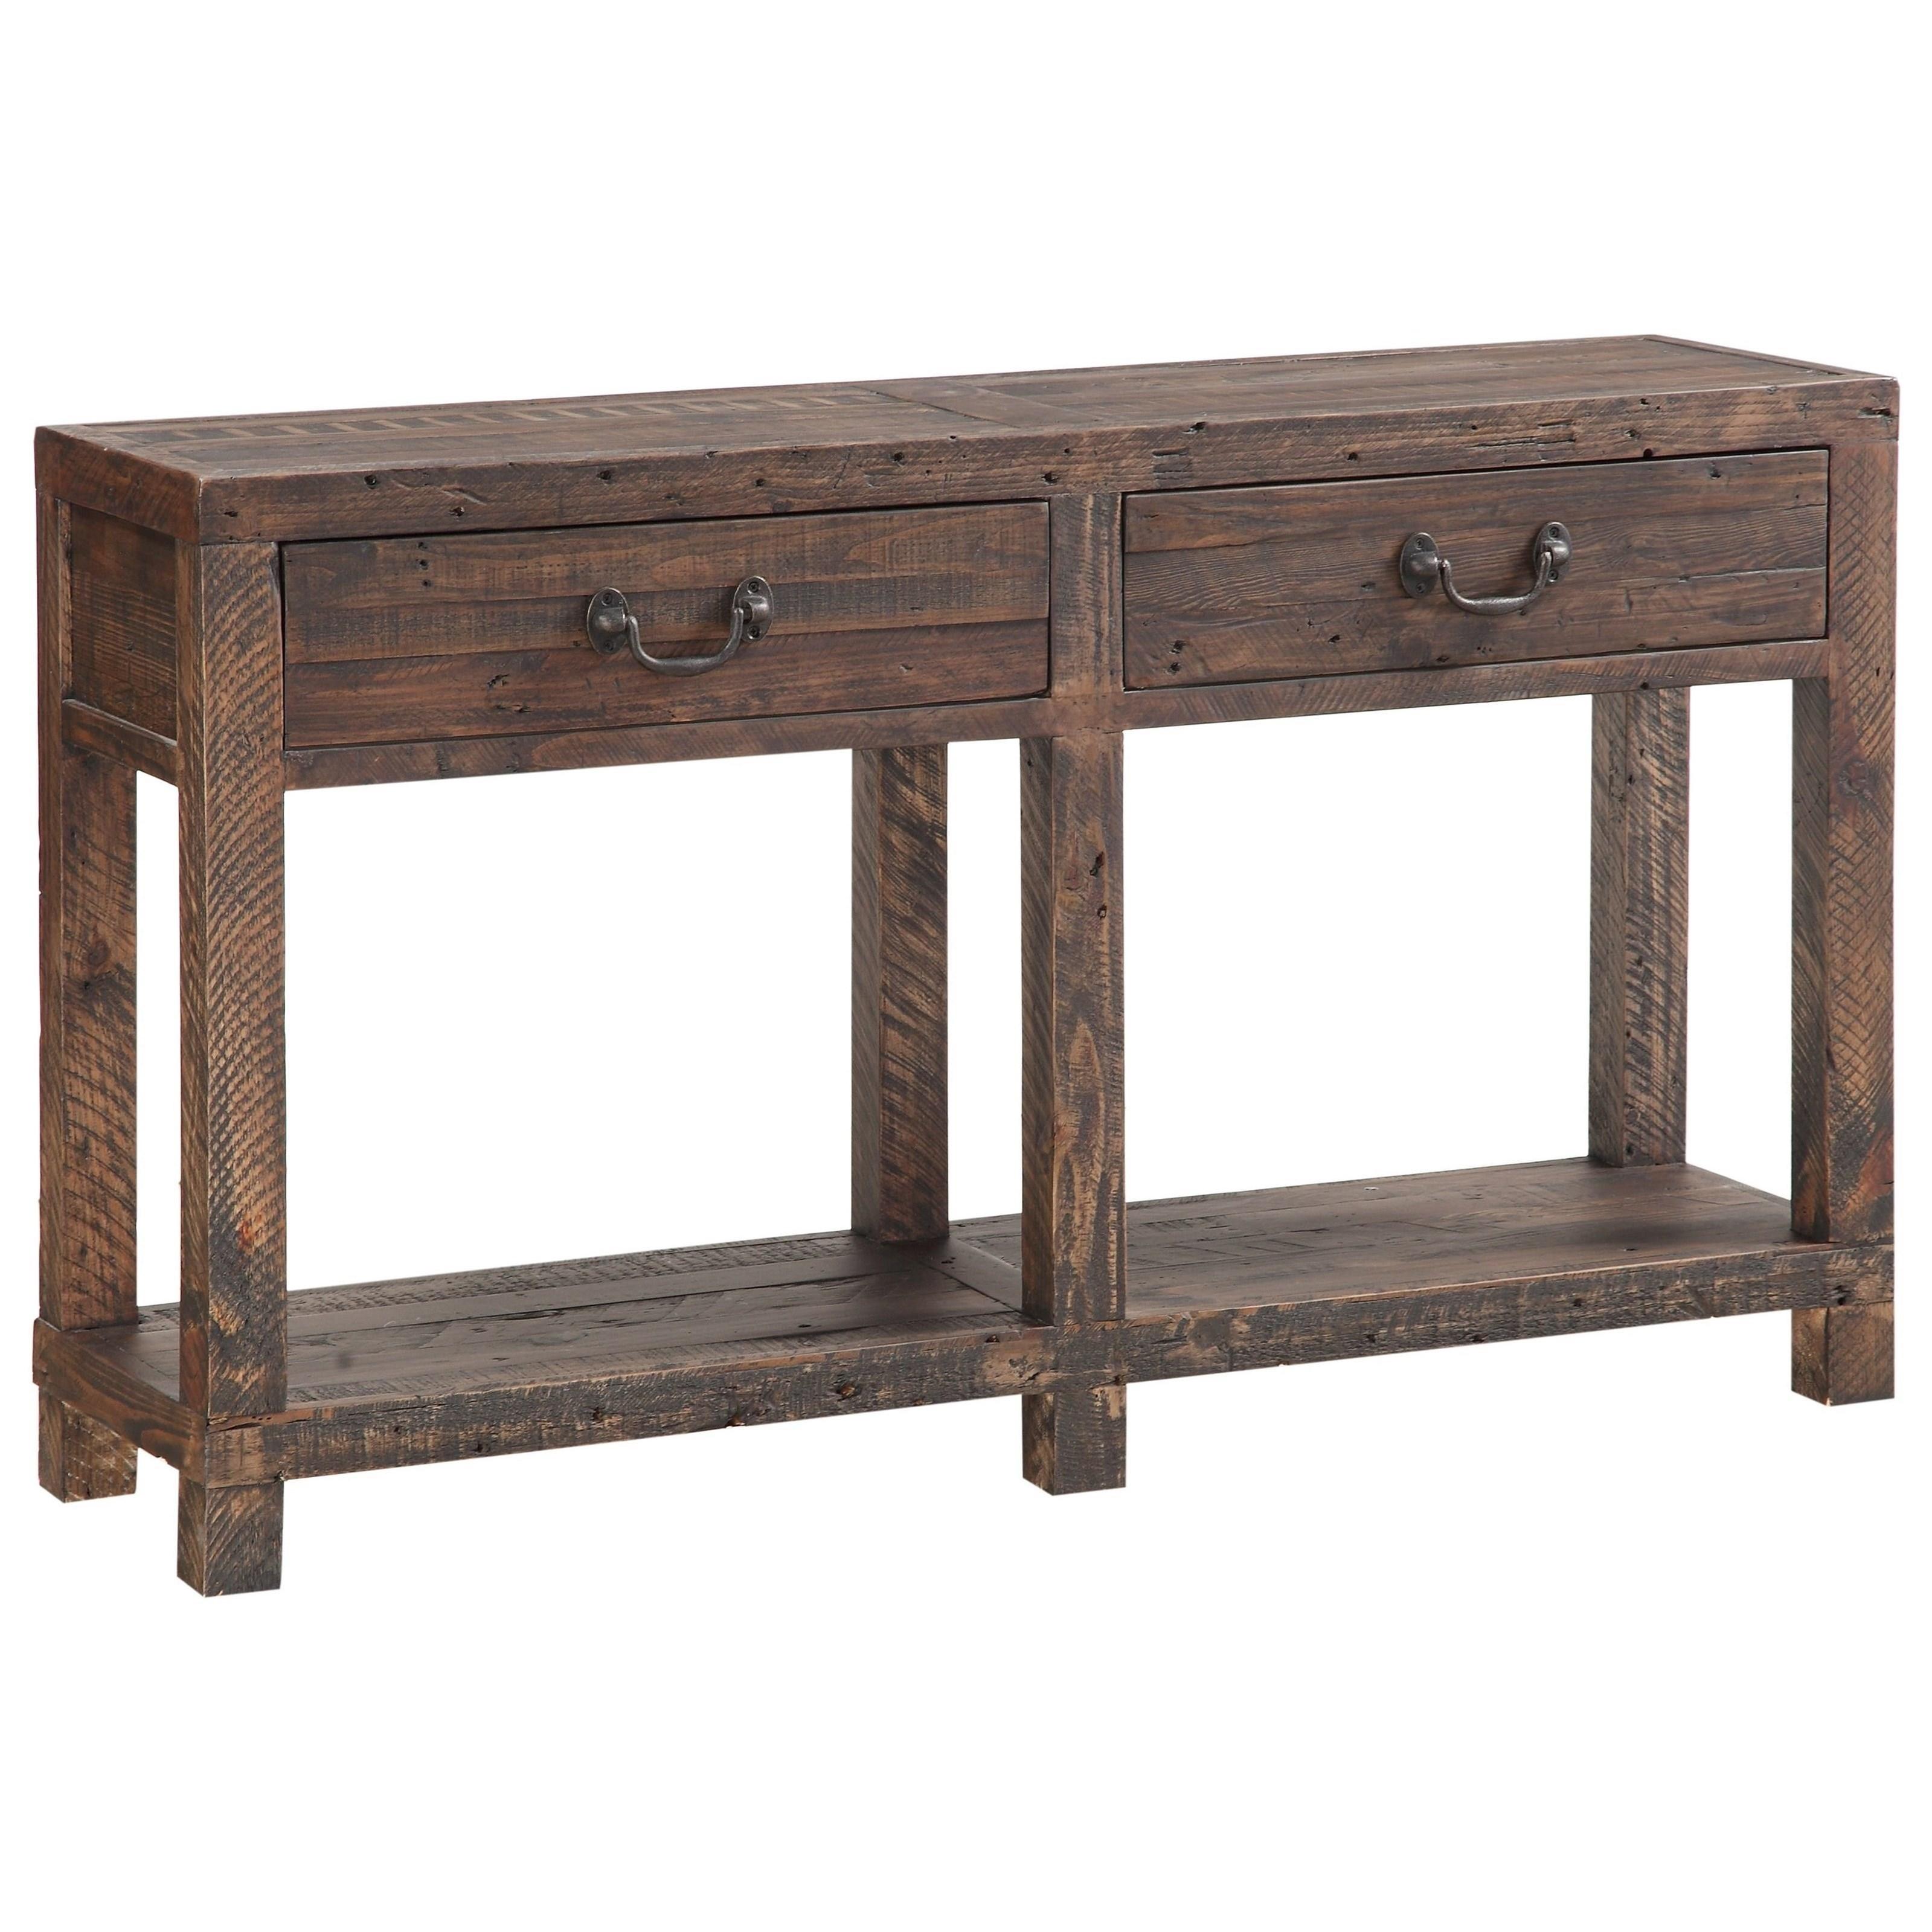 Farmhouse Console Table CRASTER 8S3923 in Smoke, Taupe 